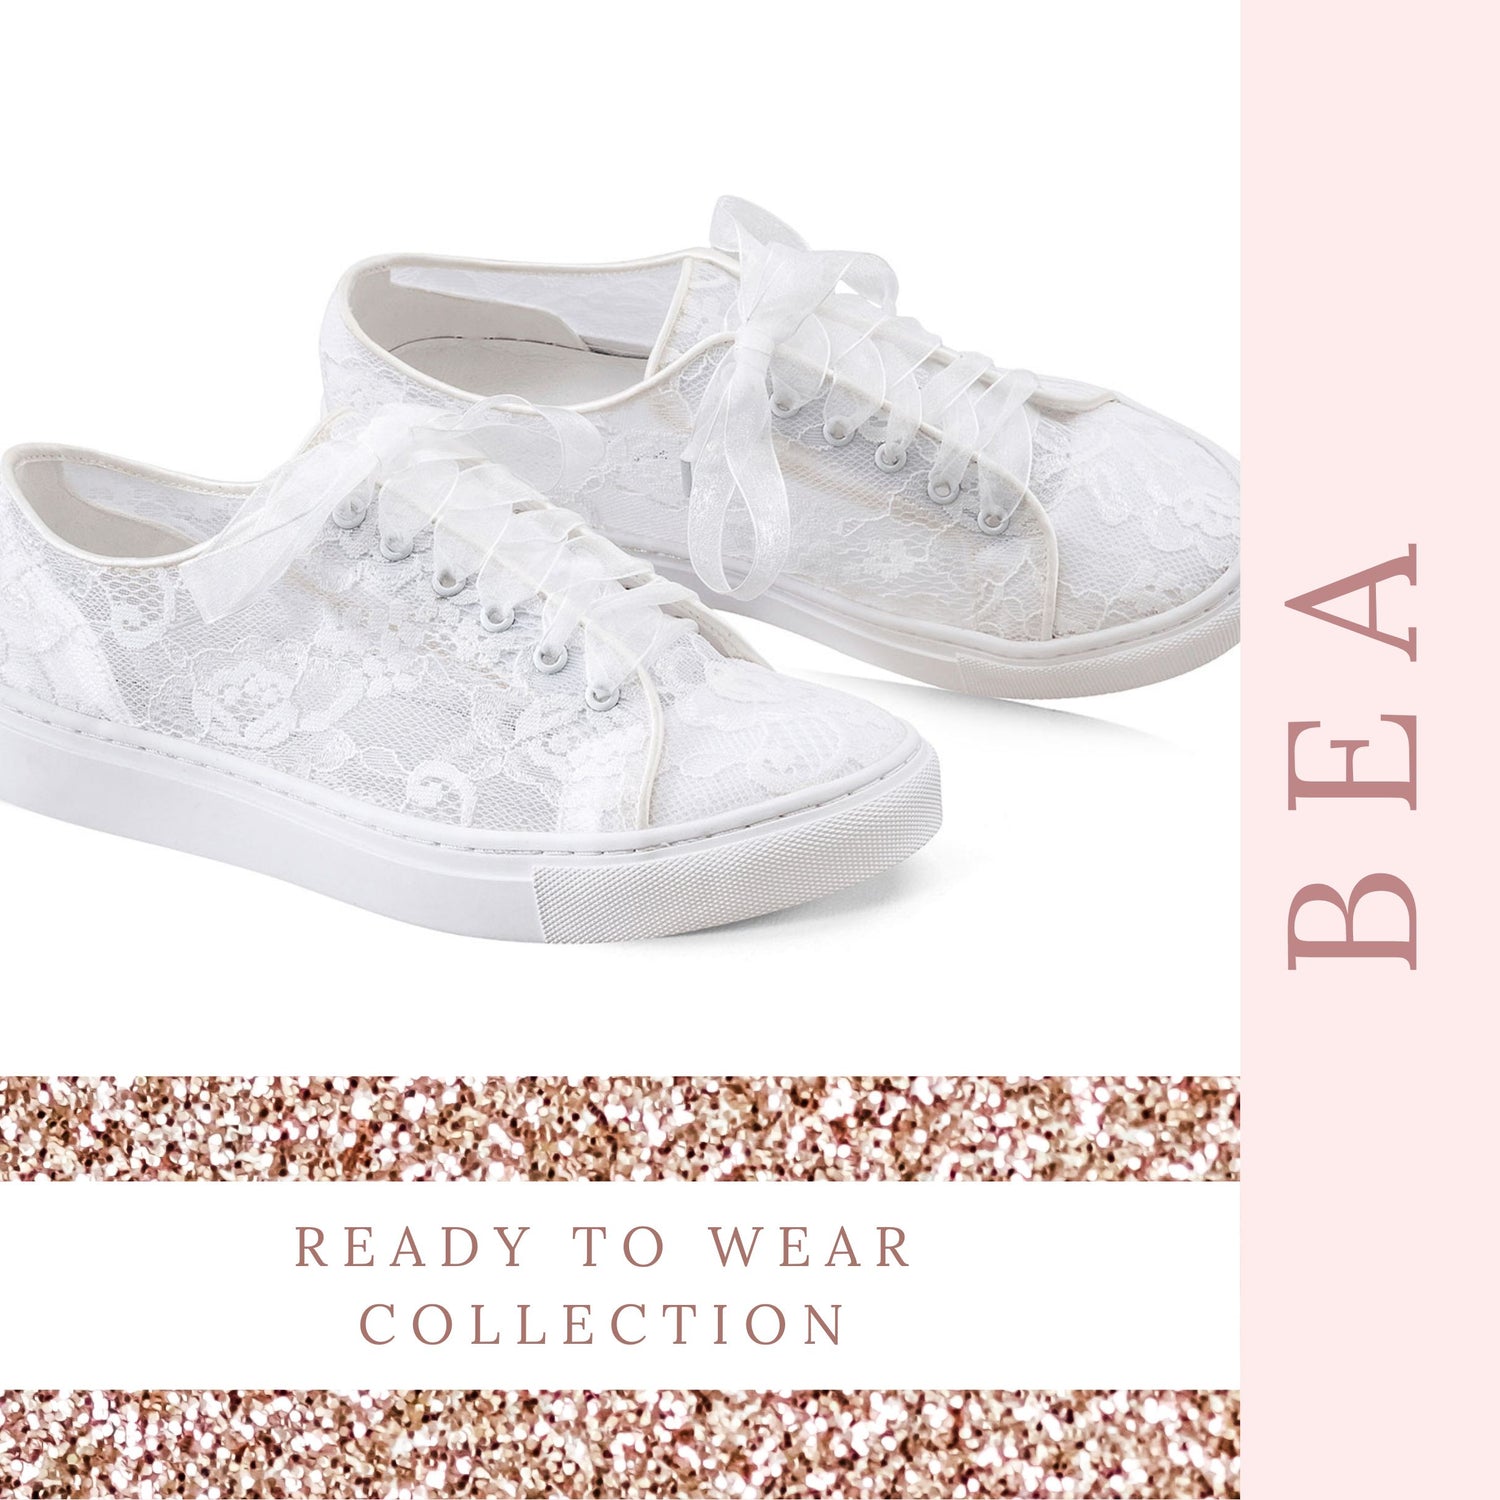 lace-wedding-flats-for-bride